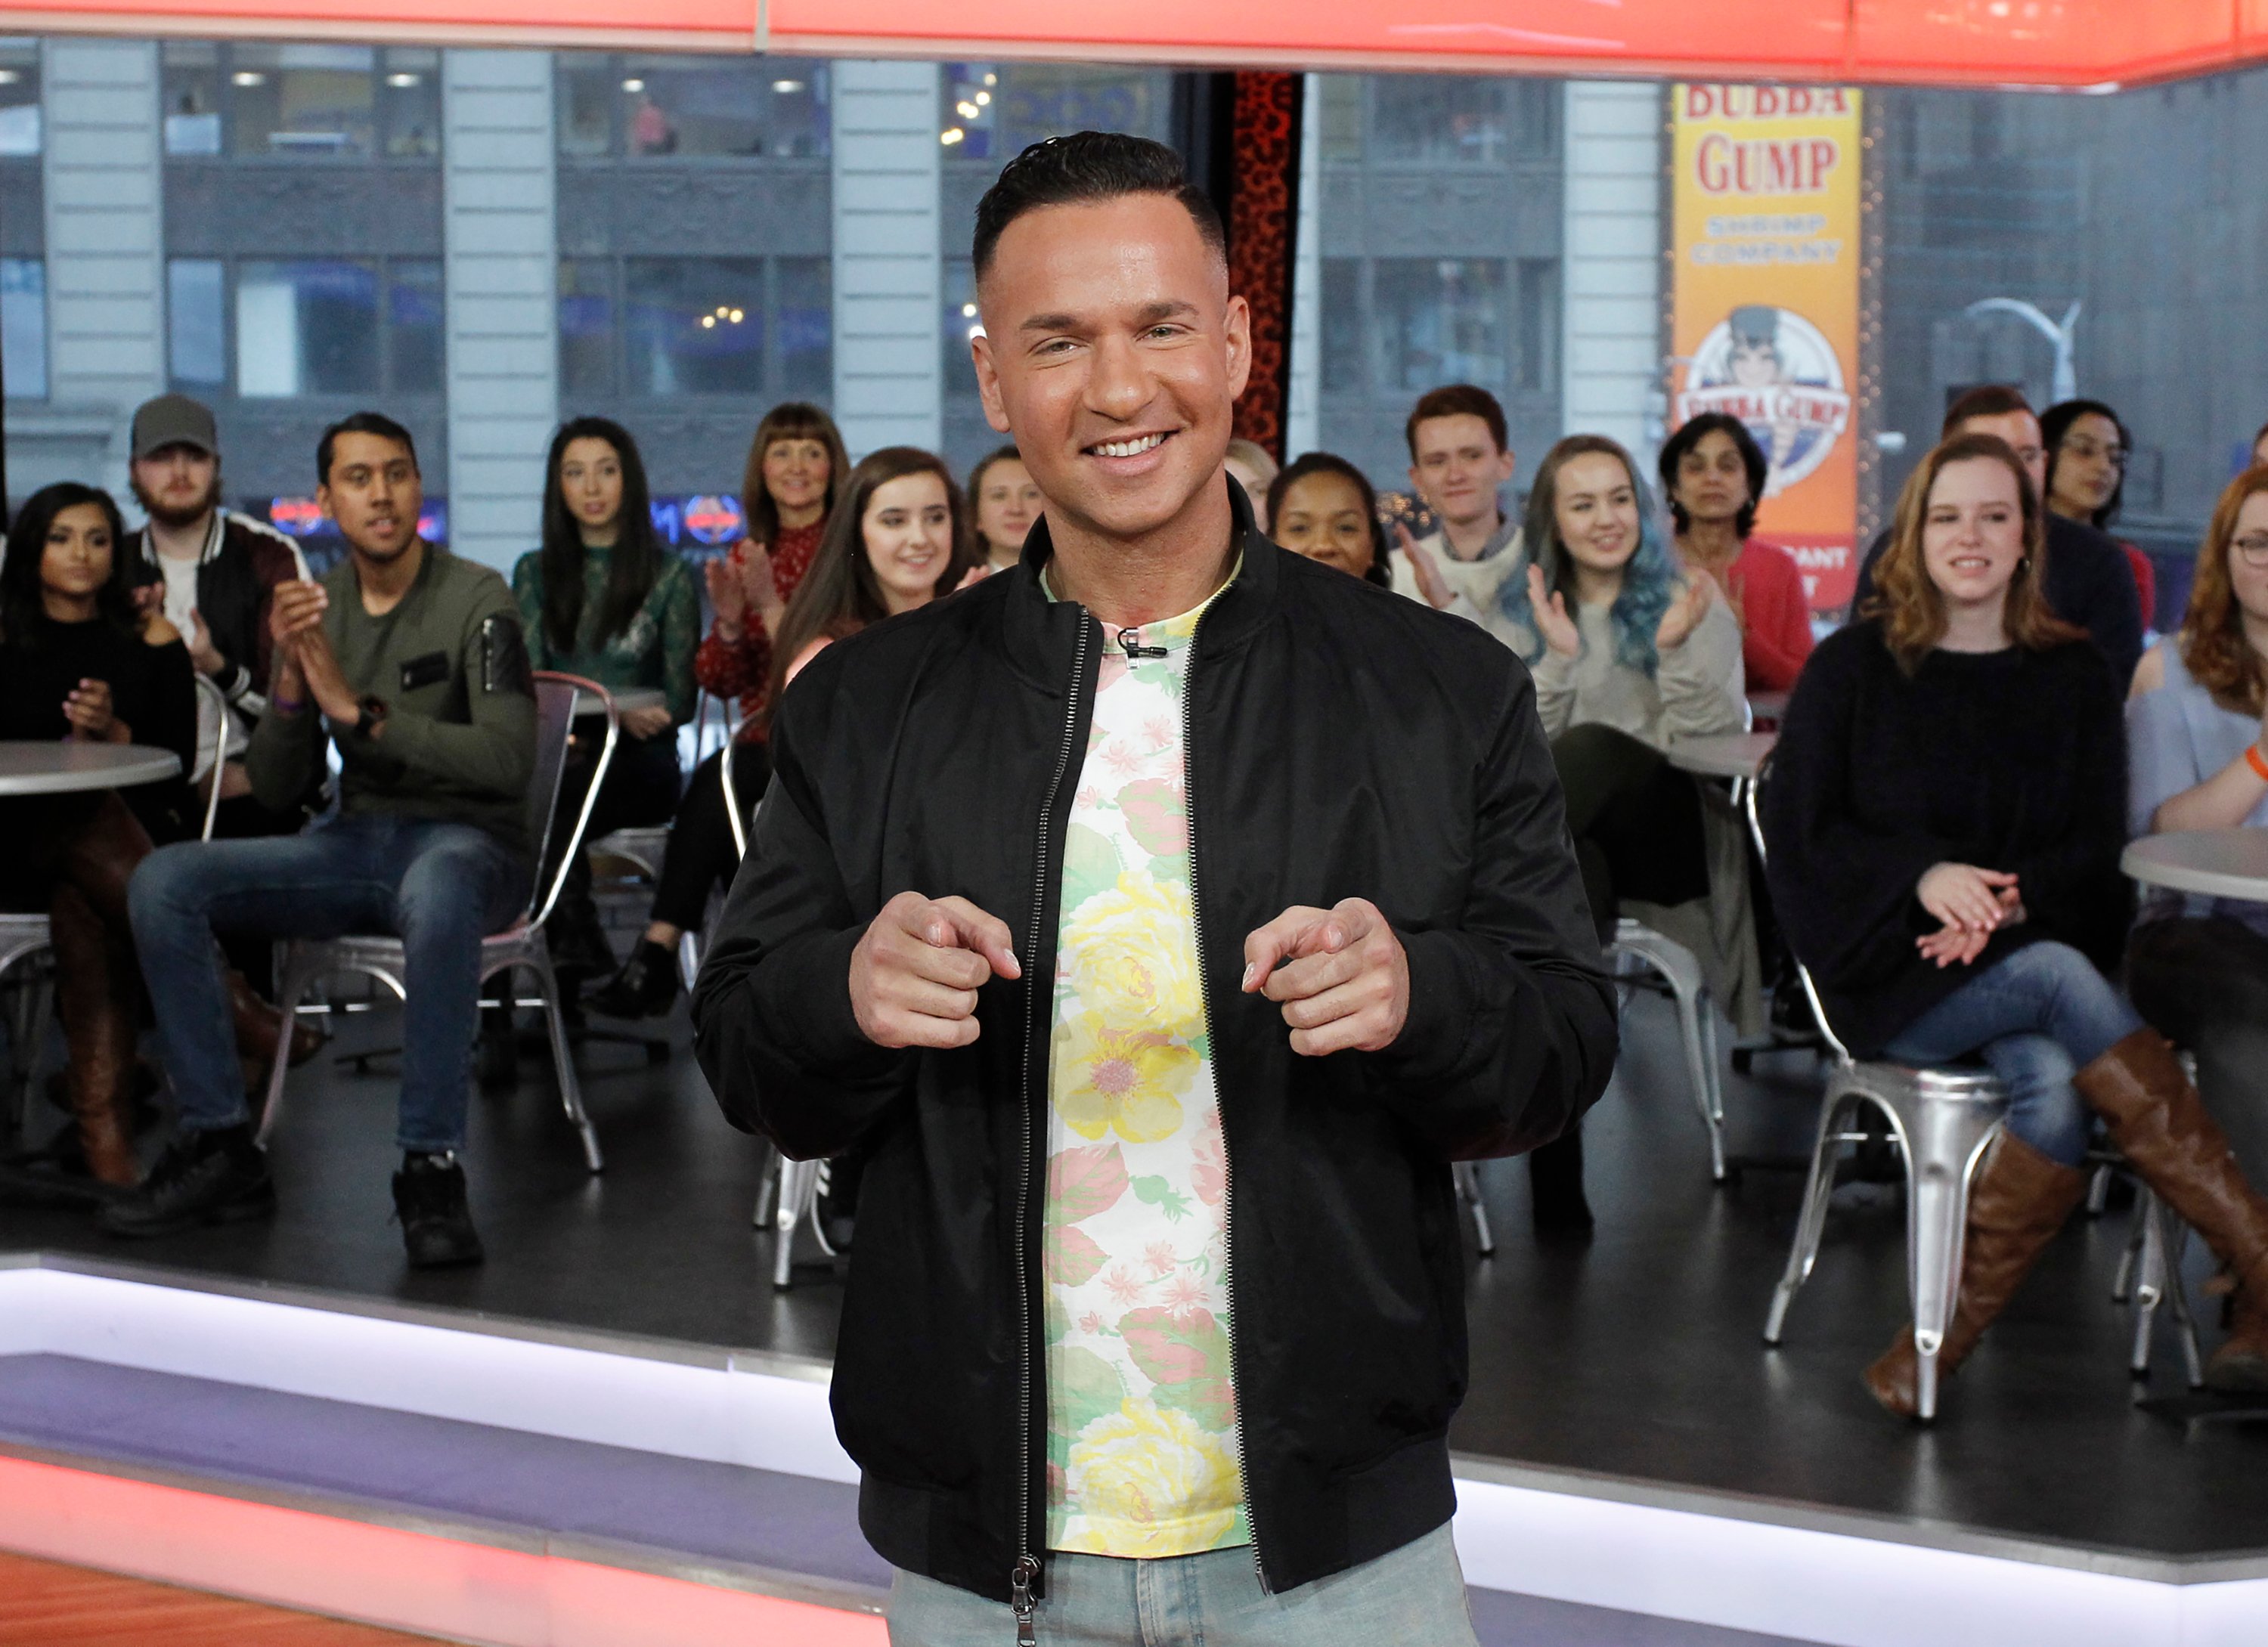 Mike 'The Situation' Sorrentino smiles and points at the camera in front of 'Good Morning America' audience